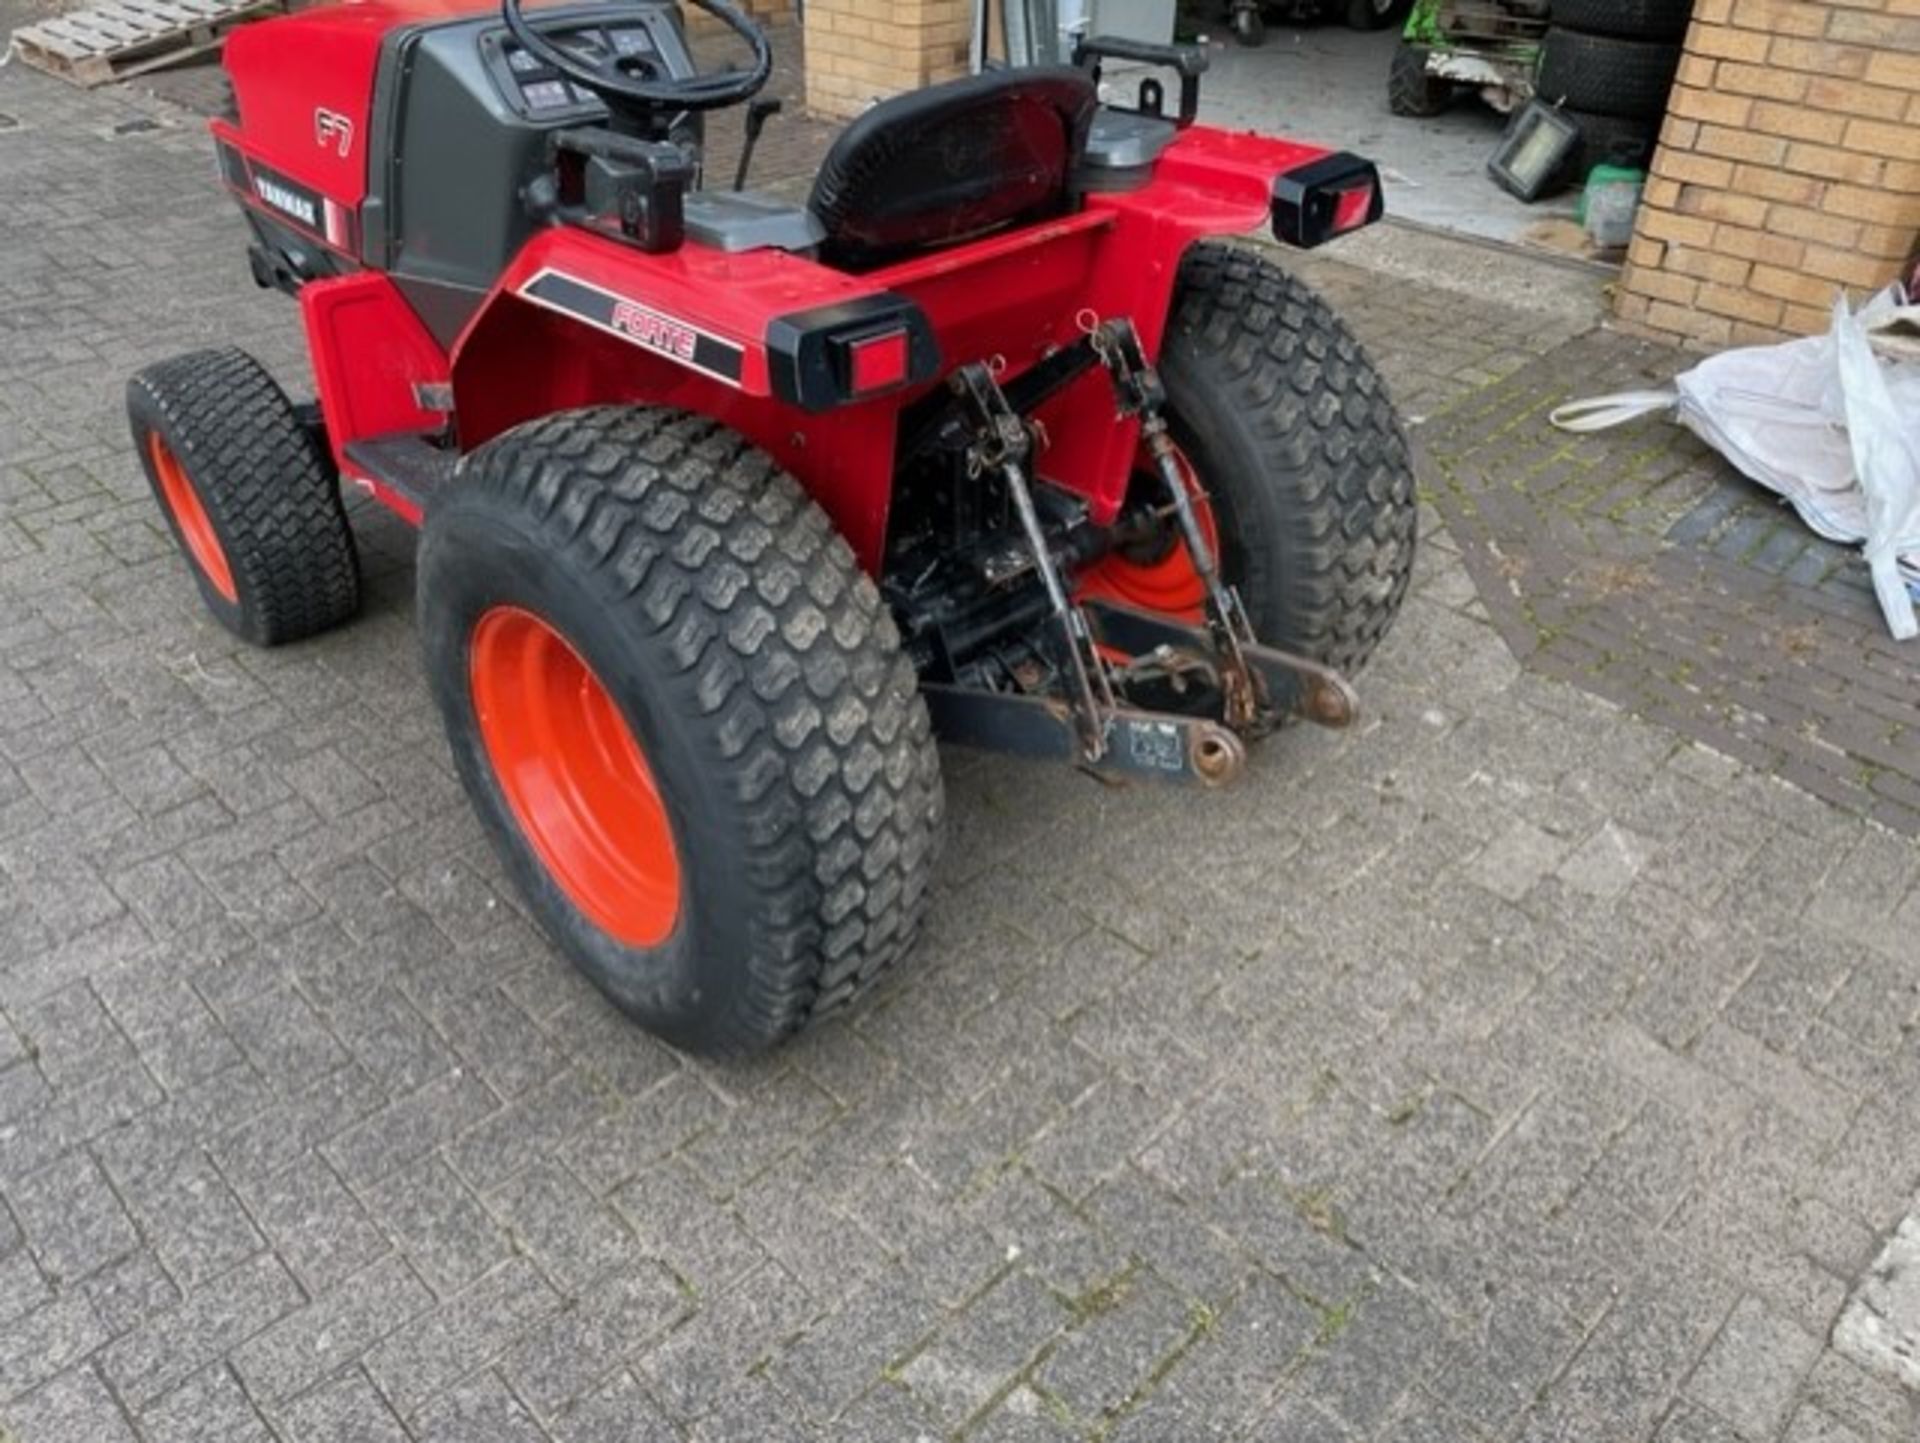 yanmar 22 horse tractor 1200 hours in full working order video can be sent to serious bidders - Image 2 of 7